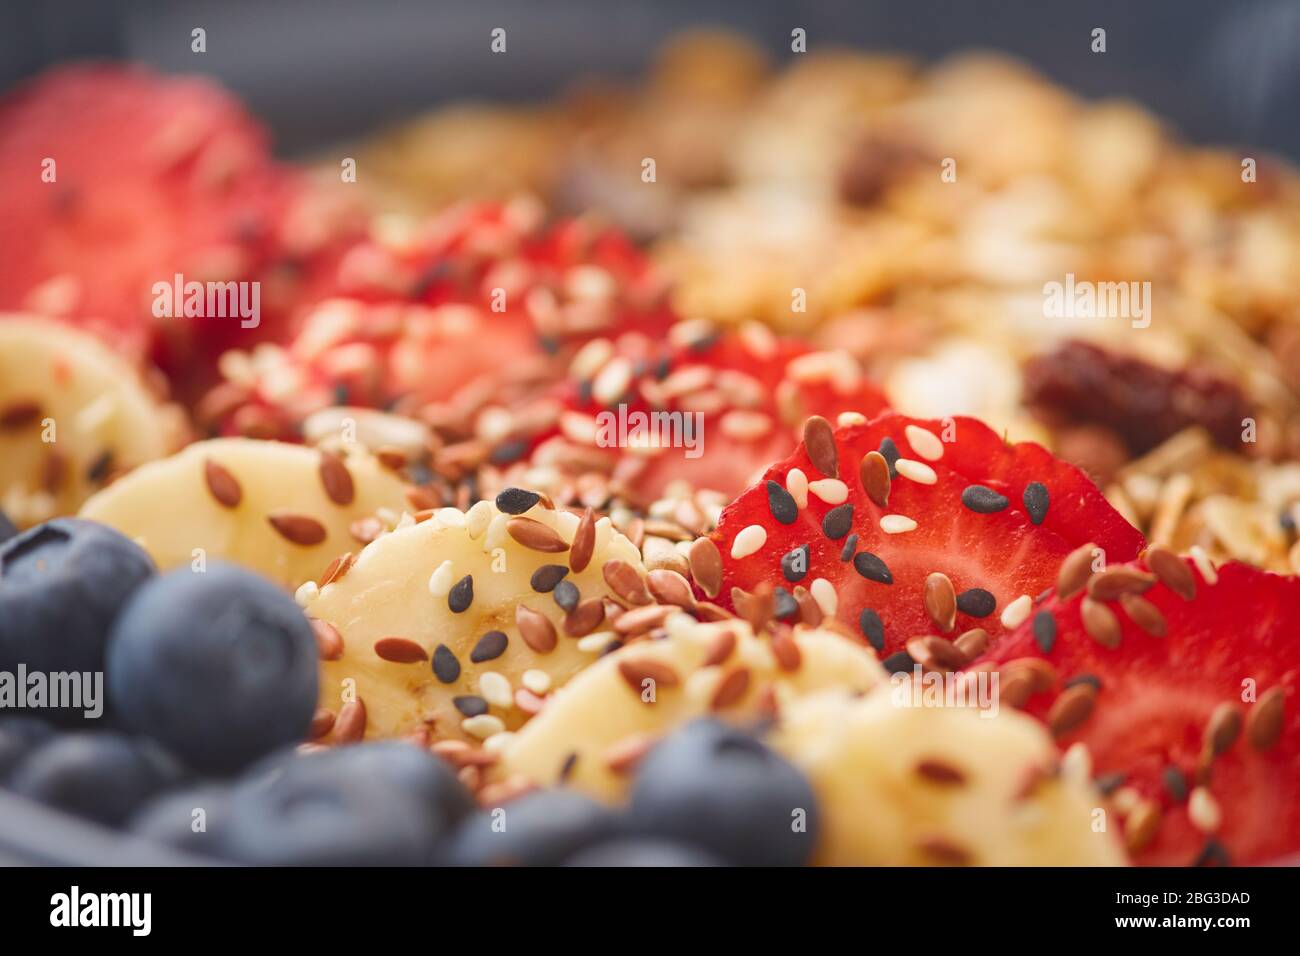 Extreme close up of delicious granola dessert decorated with fruit and berries with sesame seeds, healthy breakfast concept, copy space Stock Photo